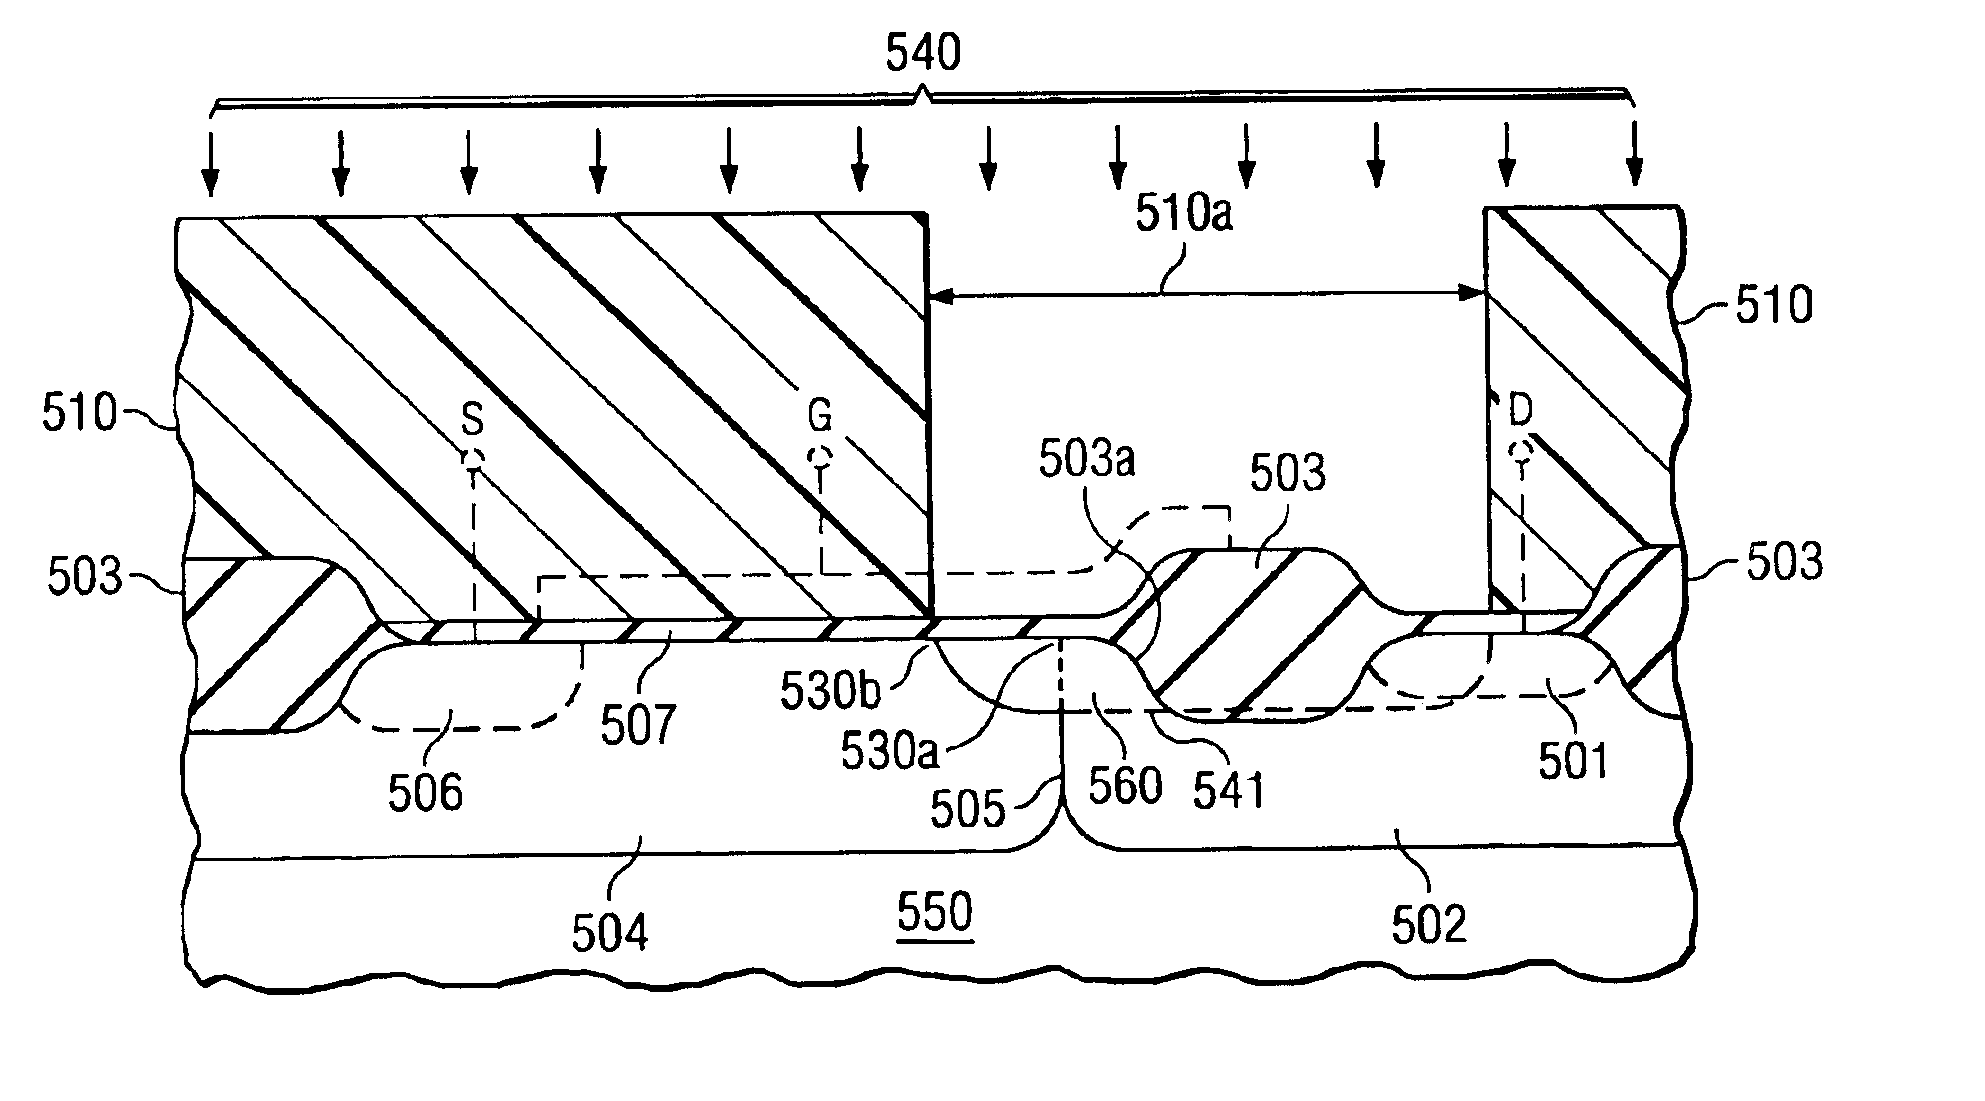 MOS transistors having higher drain current without reduced breakdown voltage